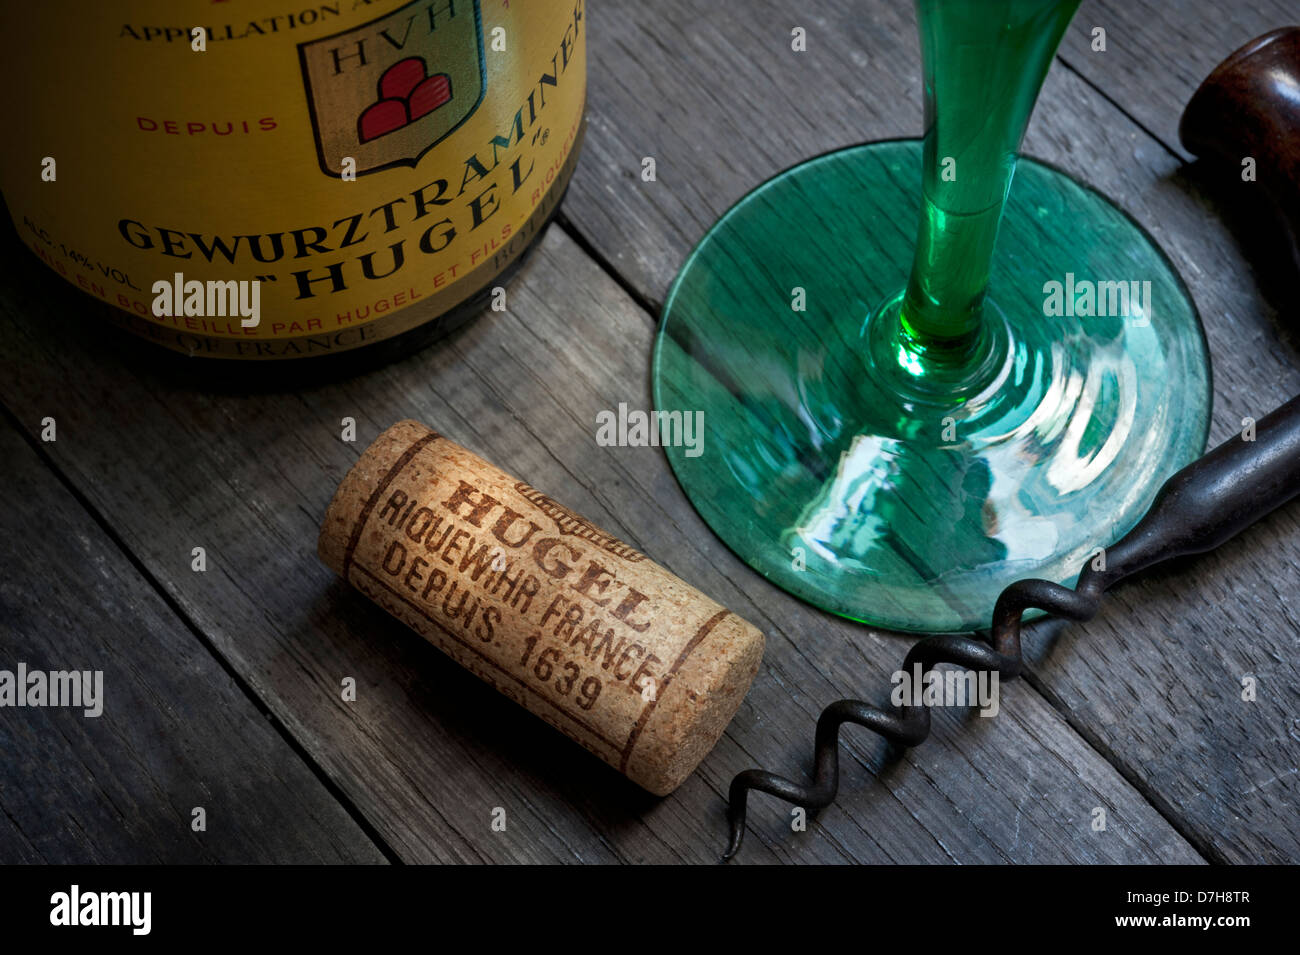 HUGEL ALSACE WINE TASTING CELLAR Gewurztraminer wine bottle glass and cork in wine cellar situation of renowned producer  Riquewihr Alsace France Stock Photo